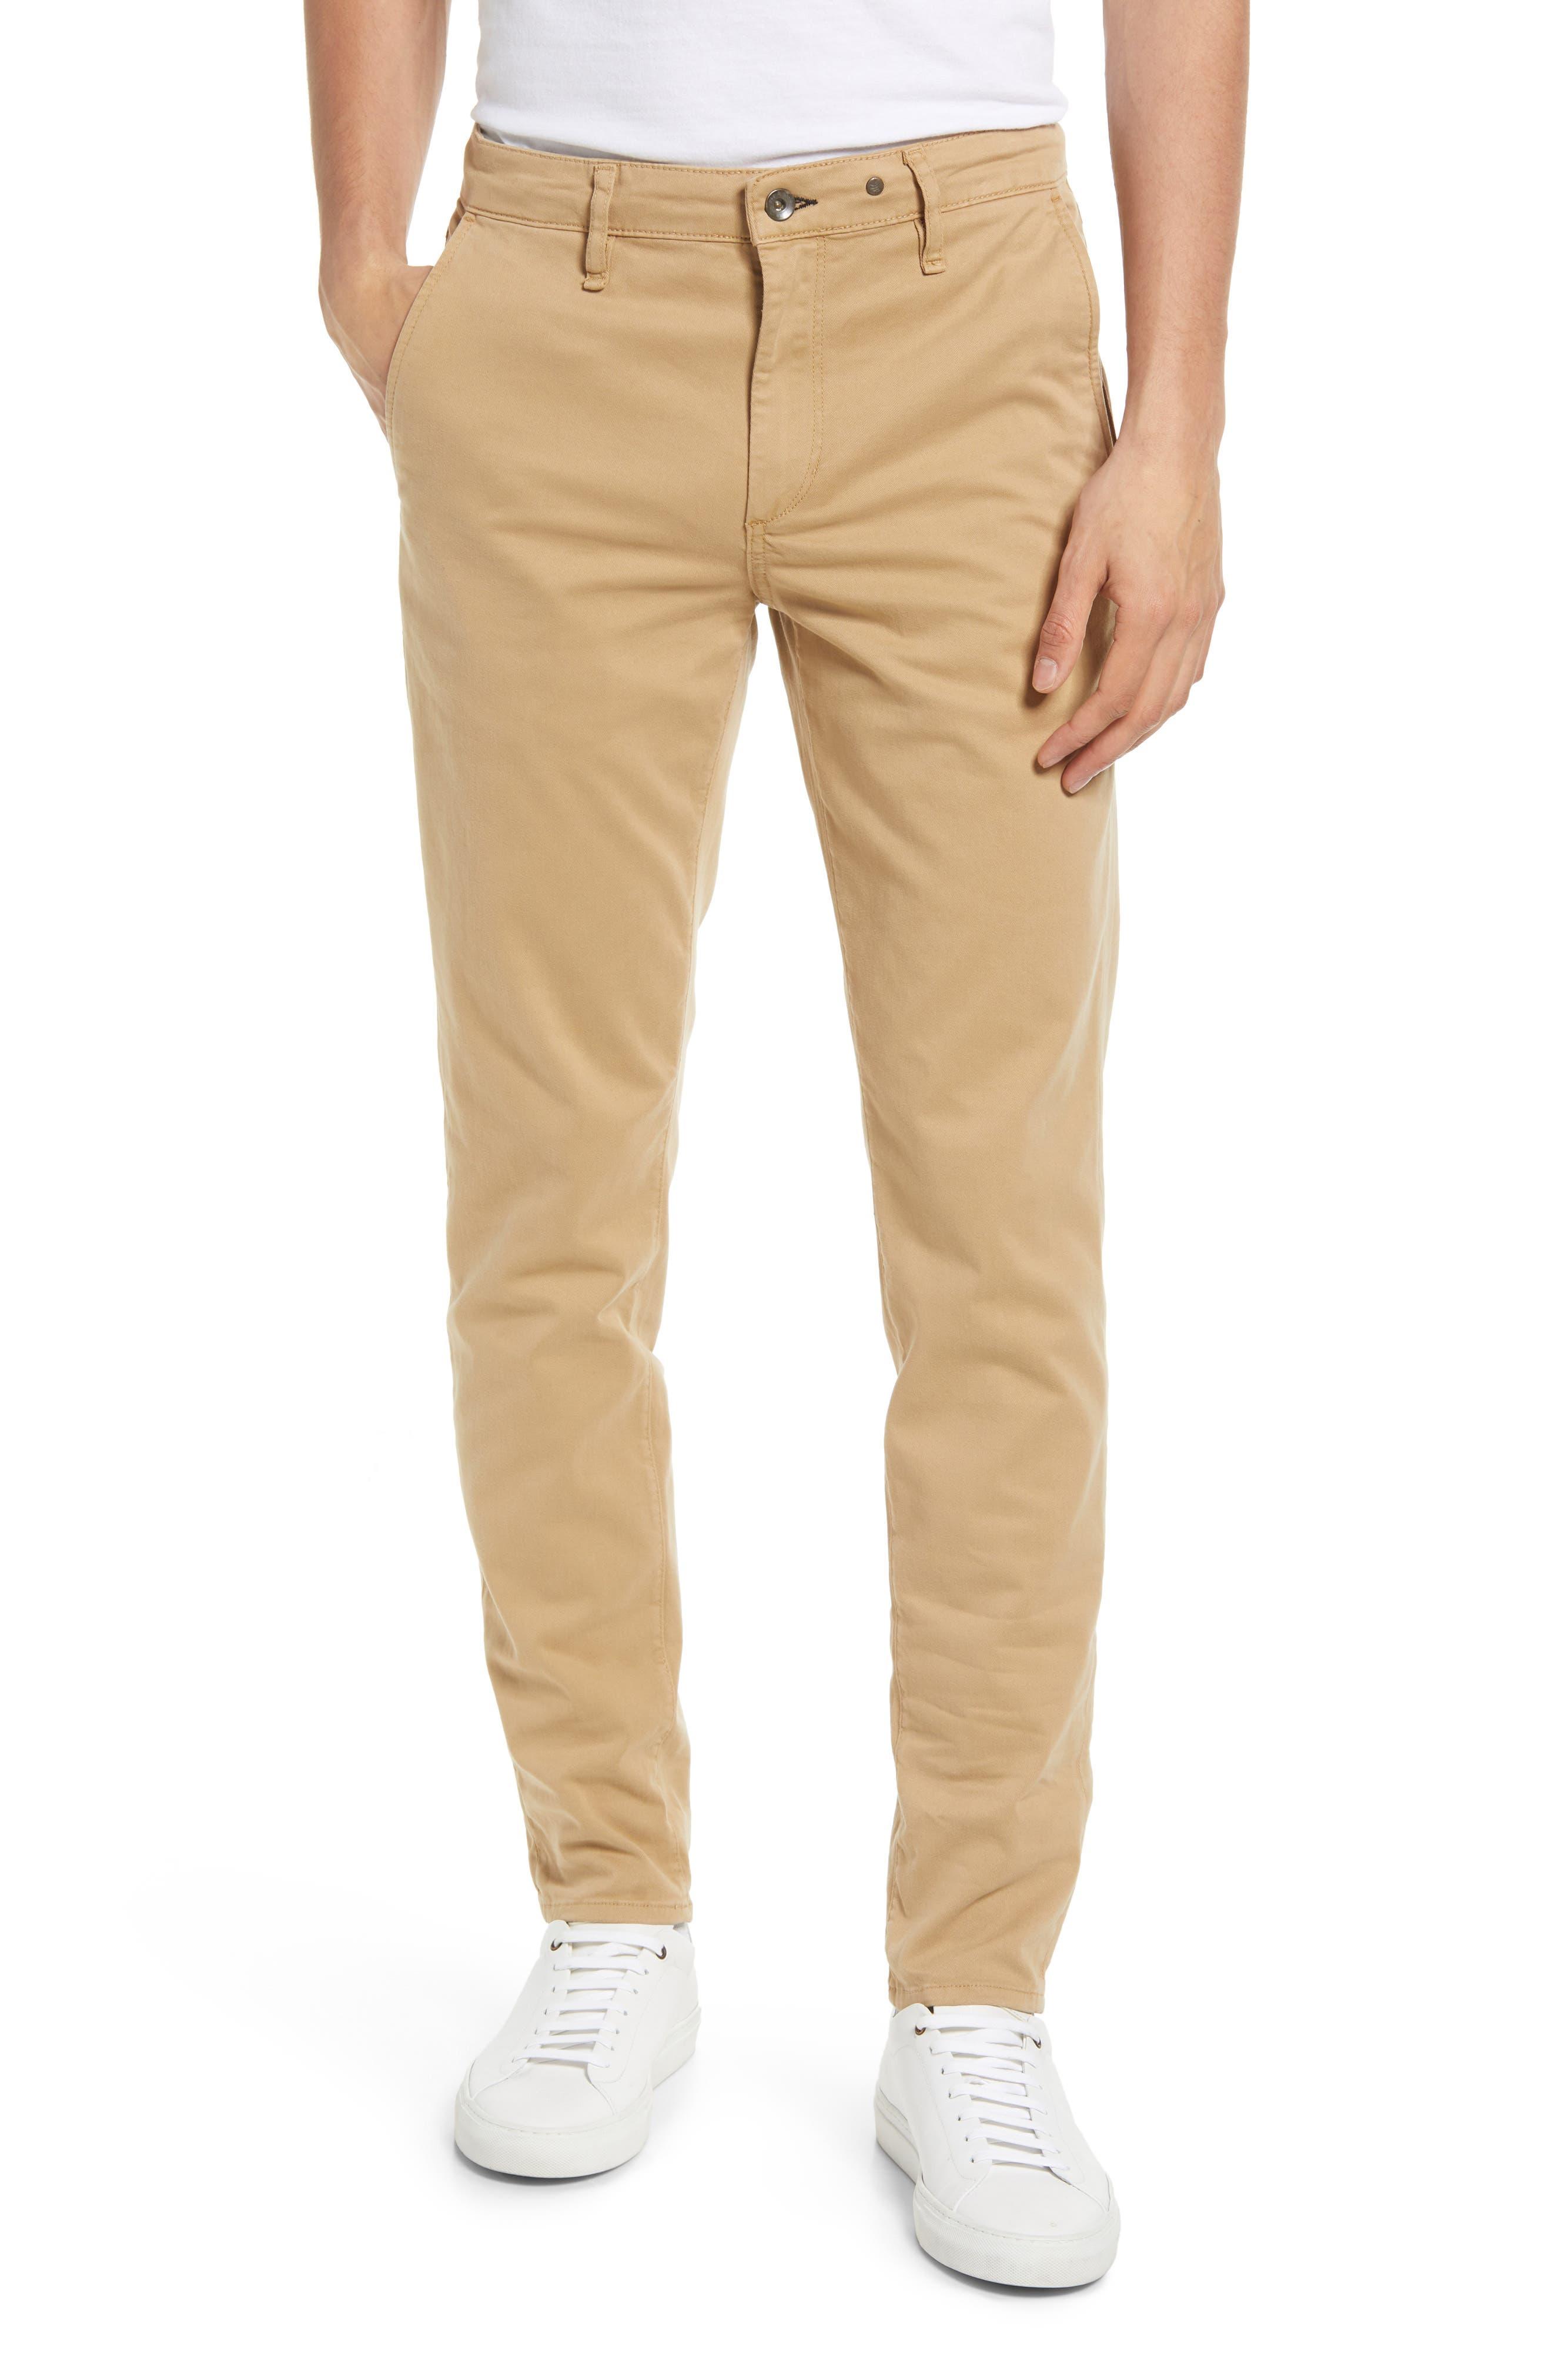 Rag & Bone Fit 1 Slim Fit Stretch Twill Chinos in Natural for Men